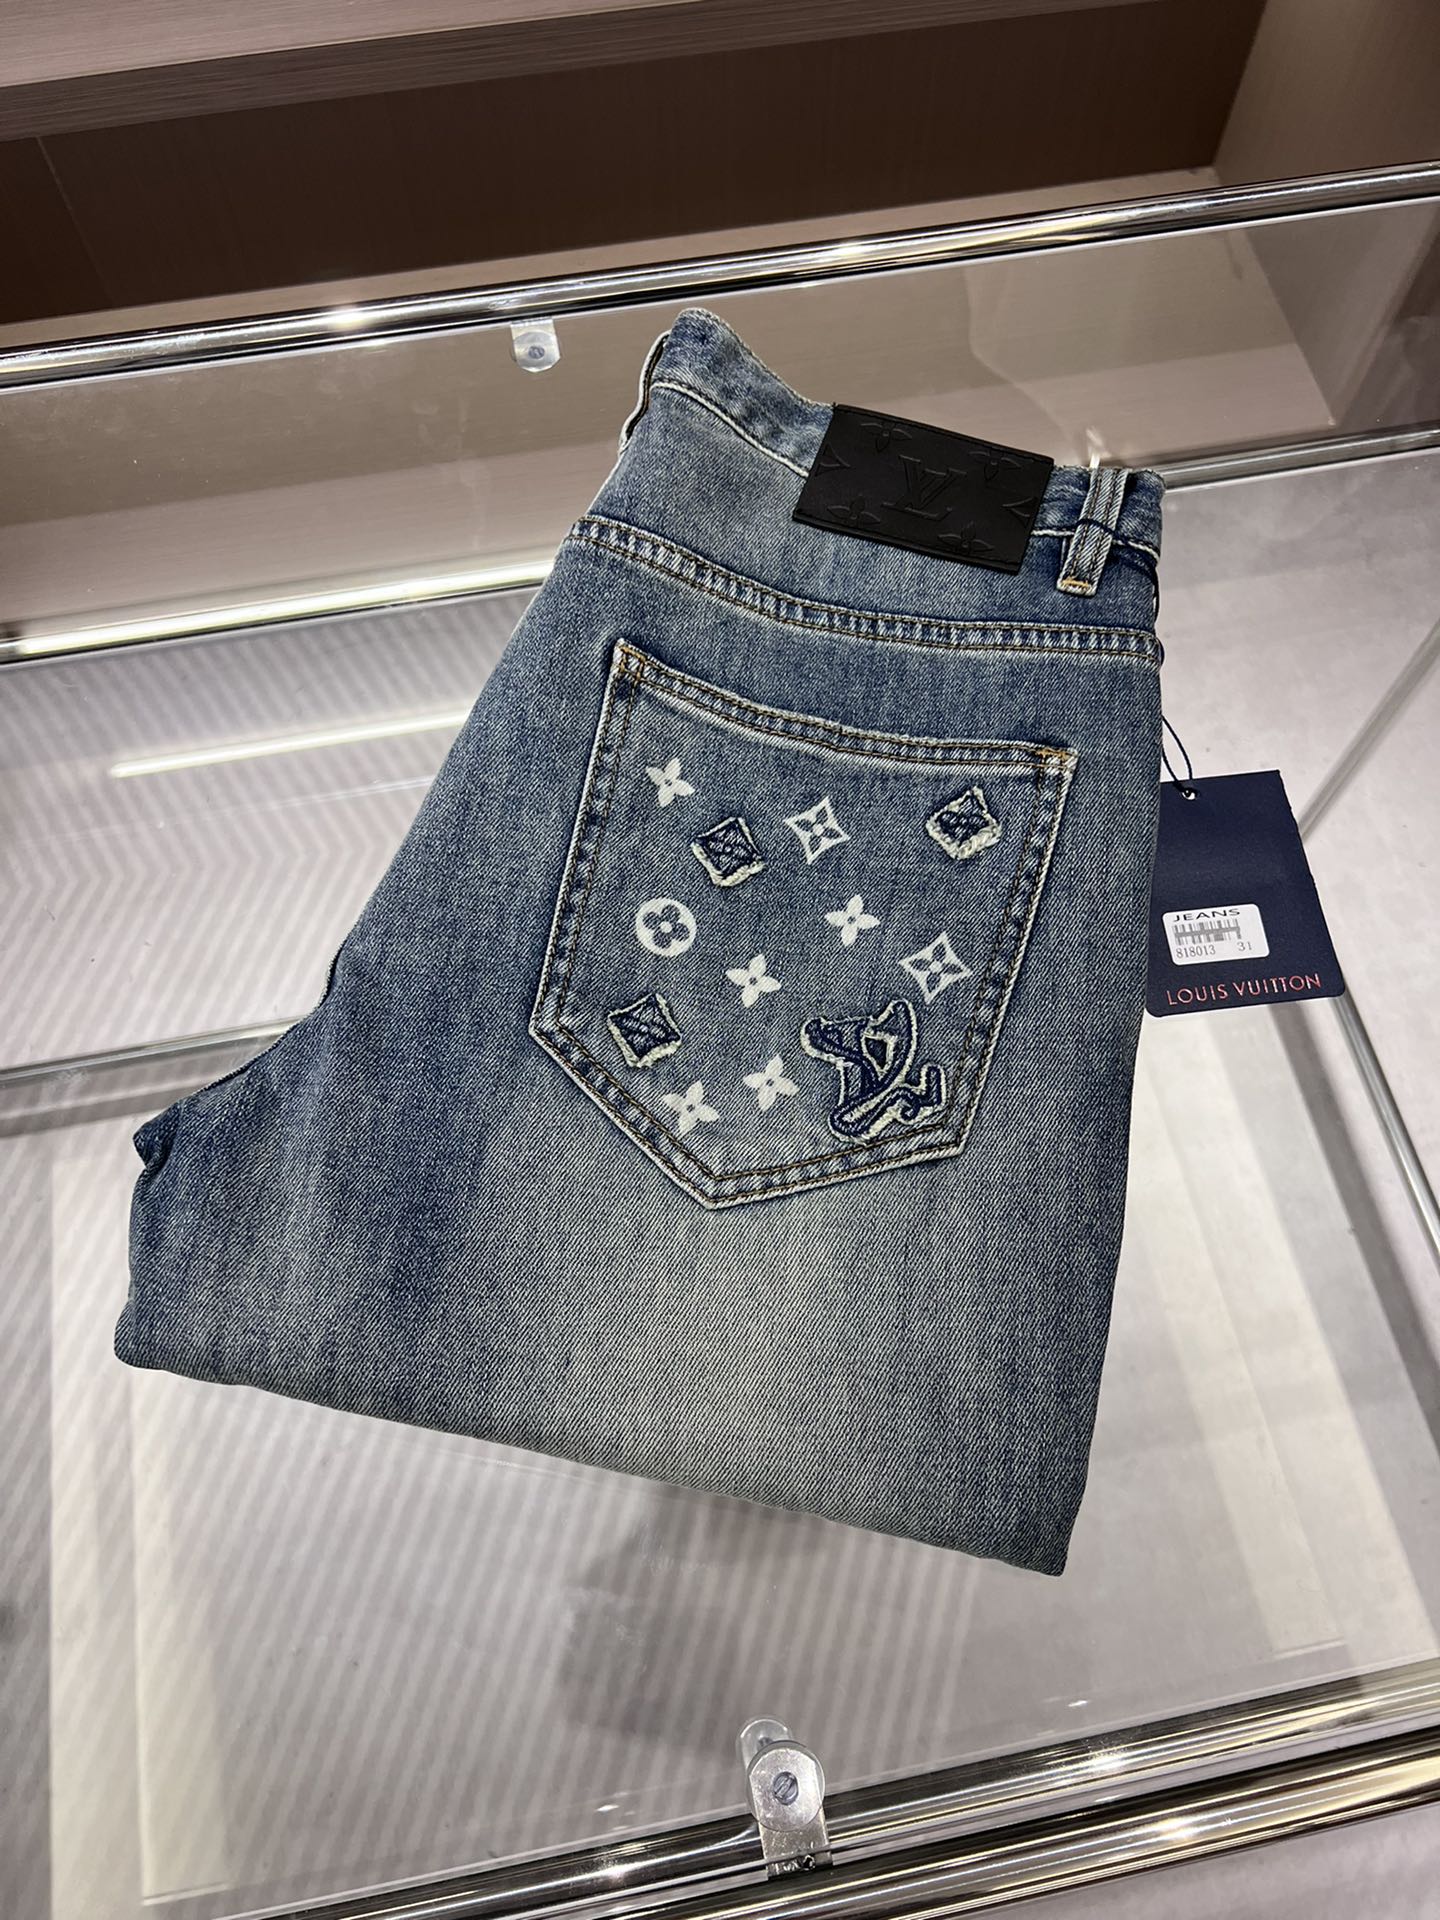 Louis Vuitton Clothing Jeans Quality AAA+ Replica
 Printing Summer Collection Fashion